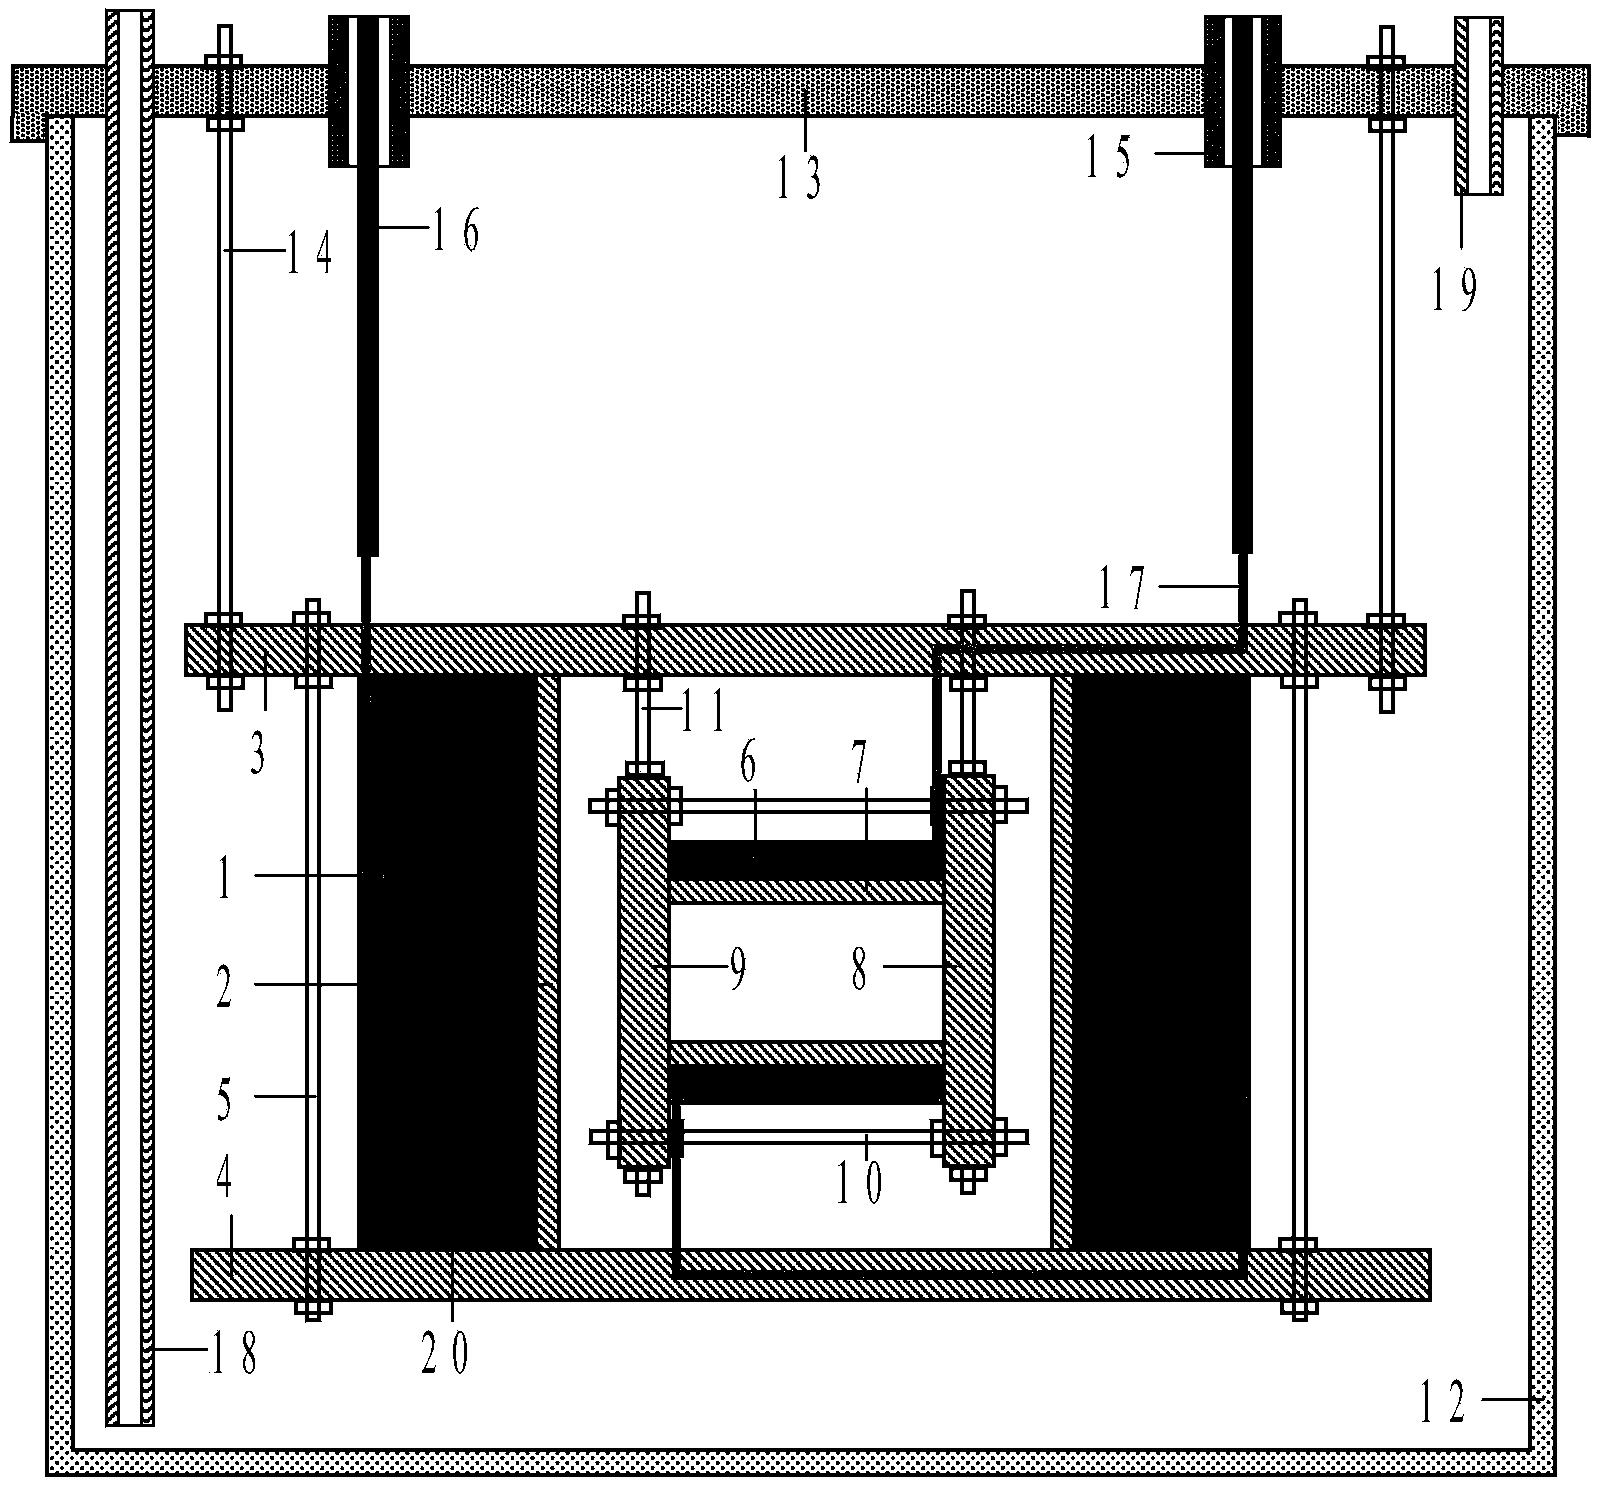 Inductor and resistor compound superconducting reactor